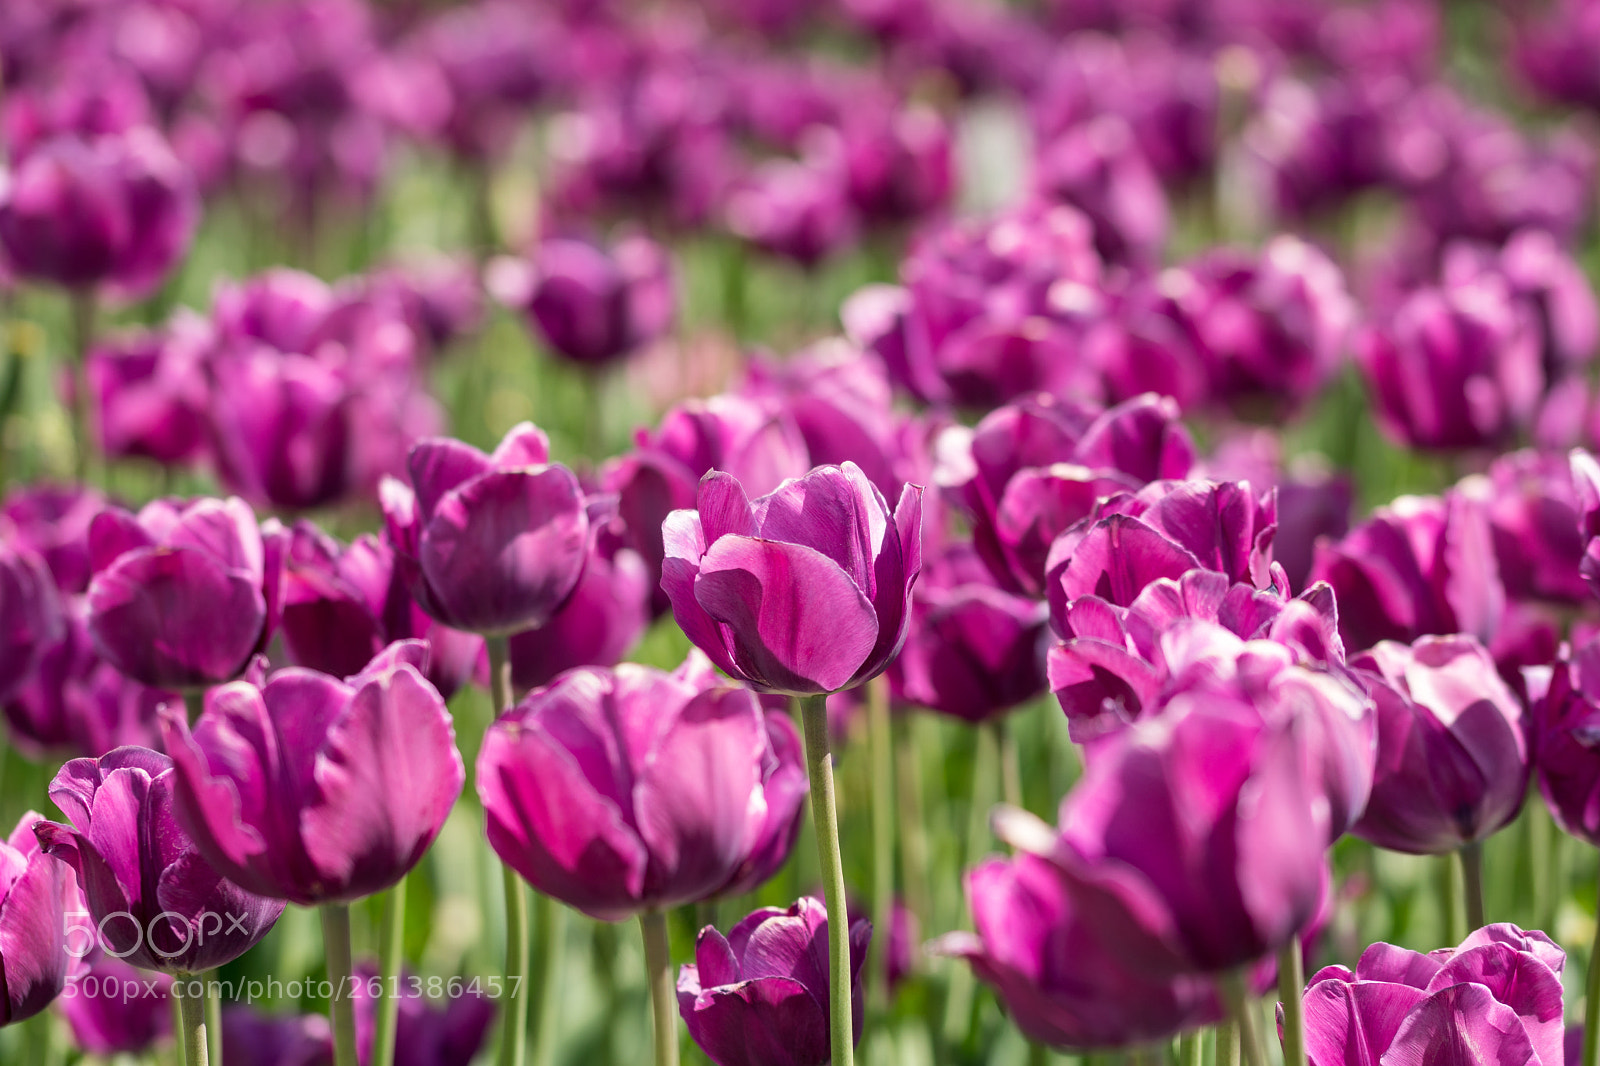 Sony a6300 sample photo. Tulpenmeer photography